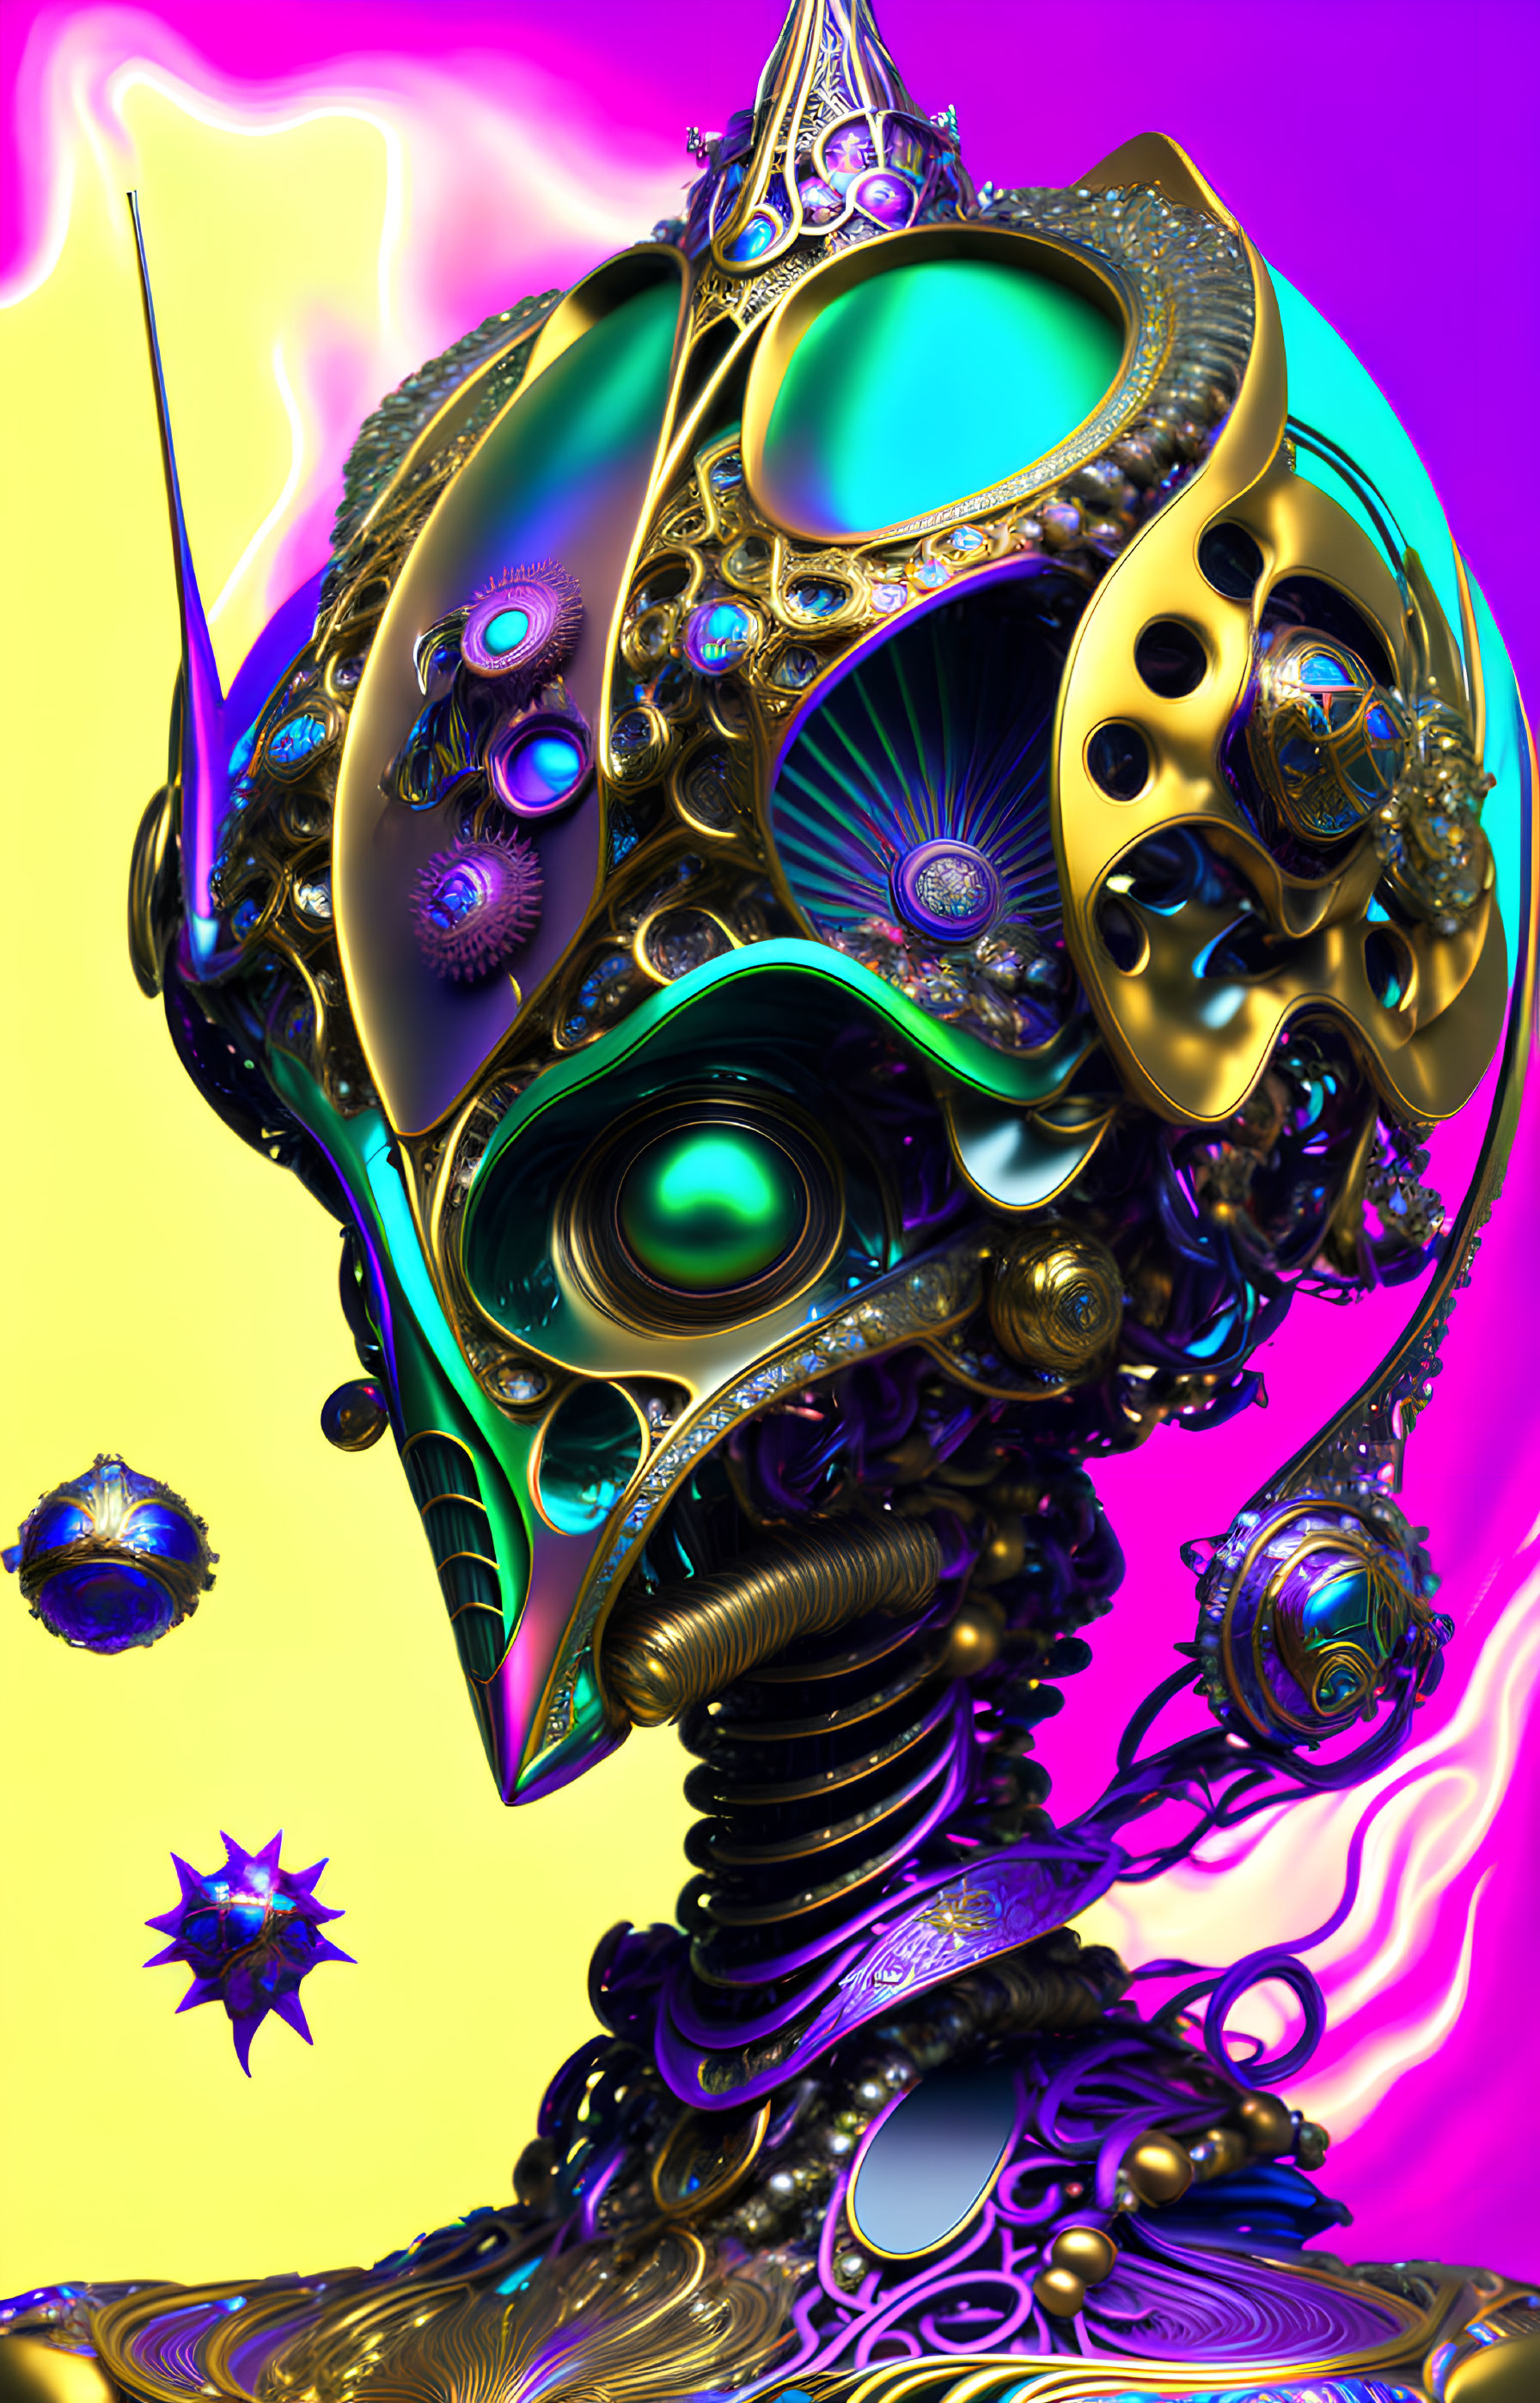 Colorful digital artwork of alien-like robotic head on psychedelic background